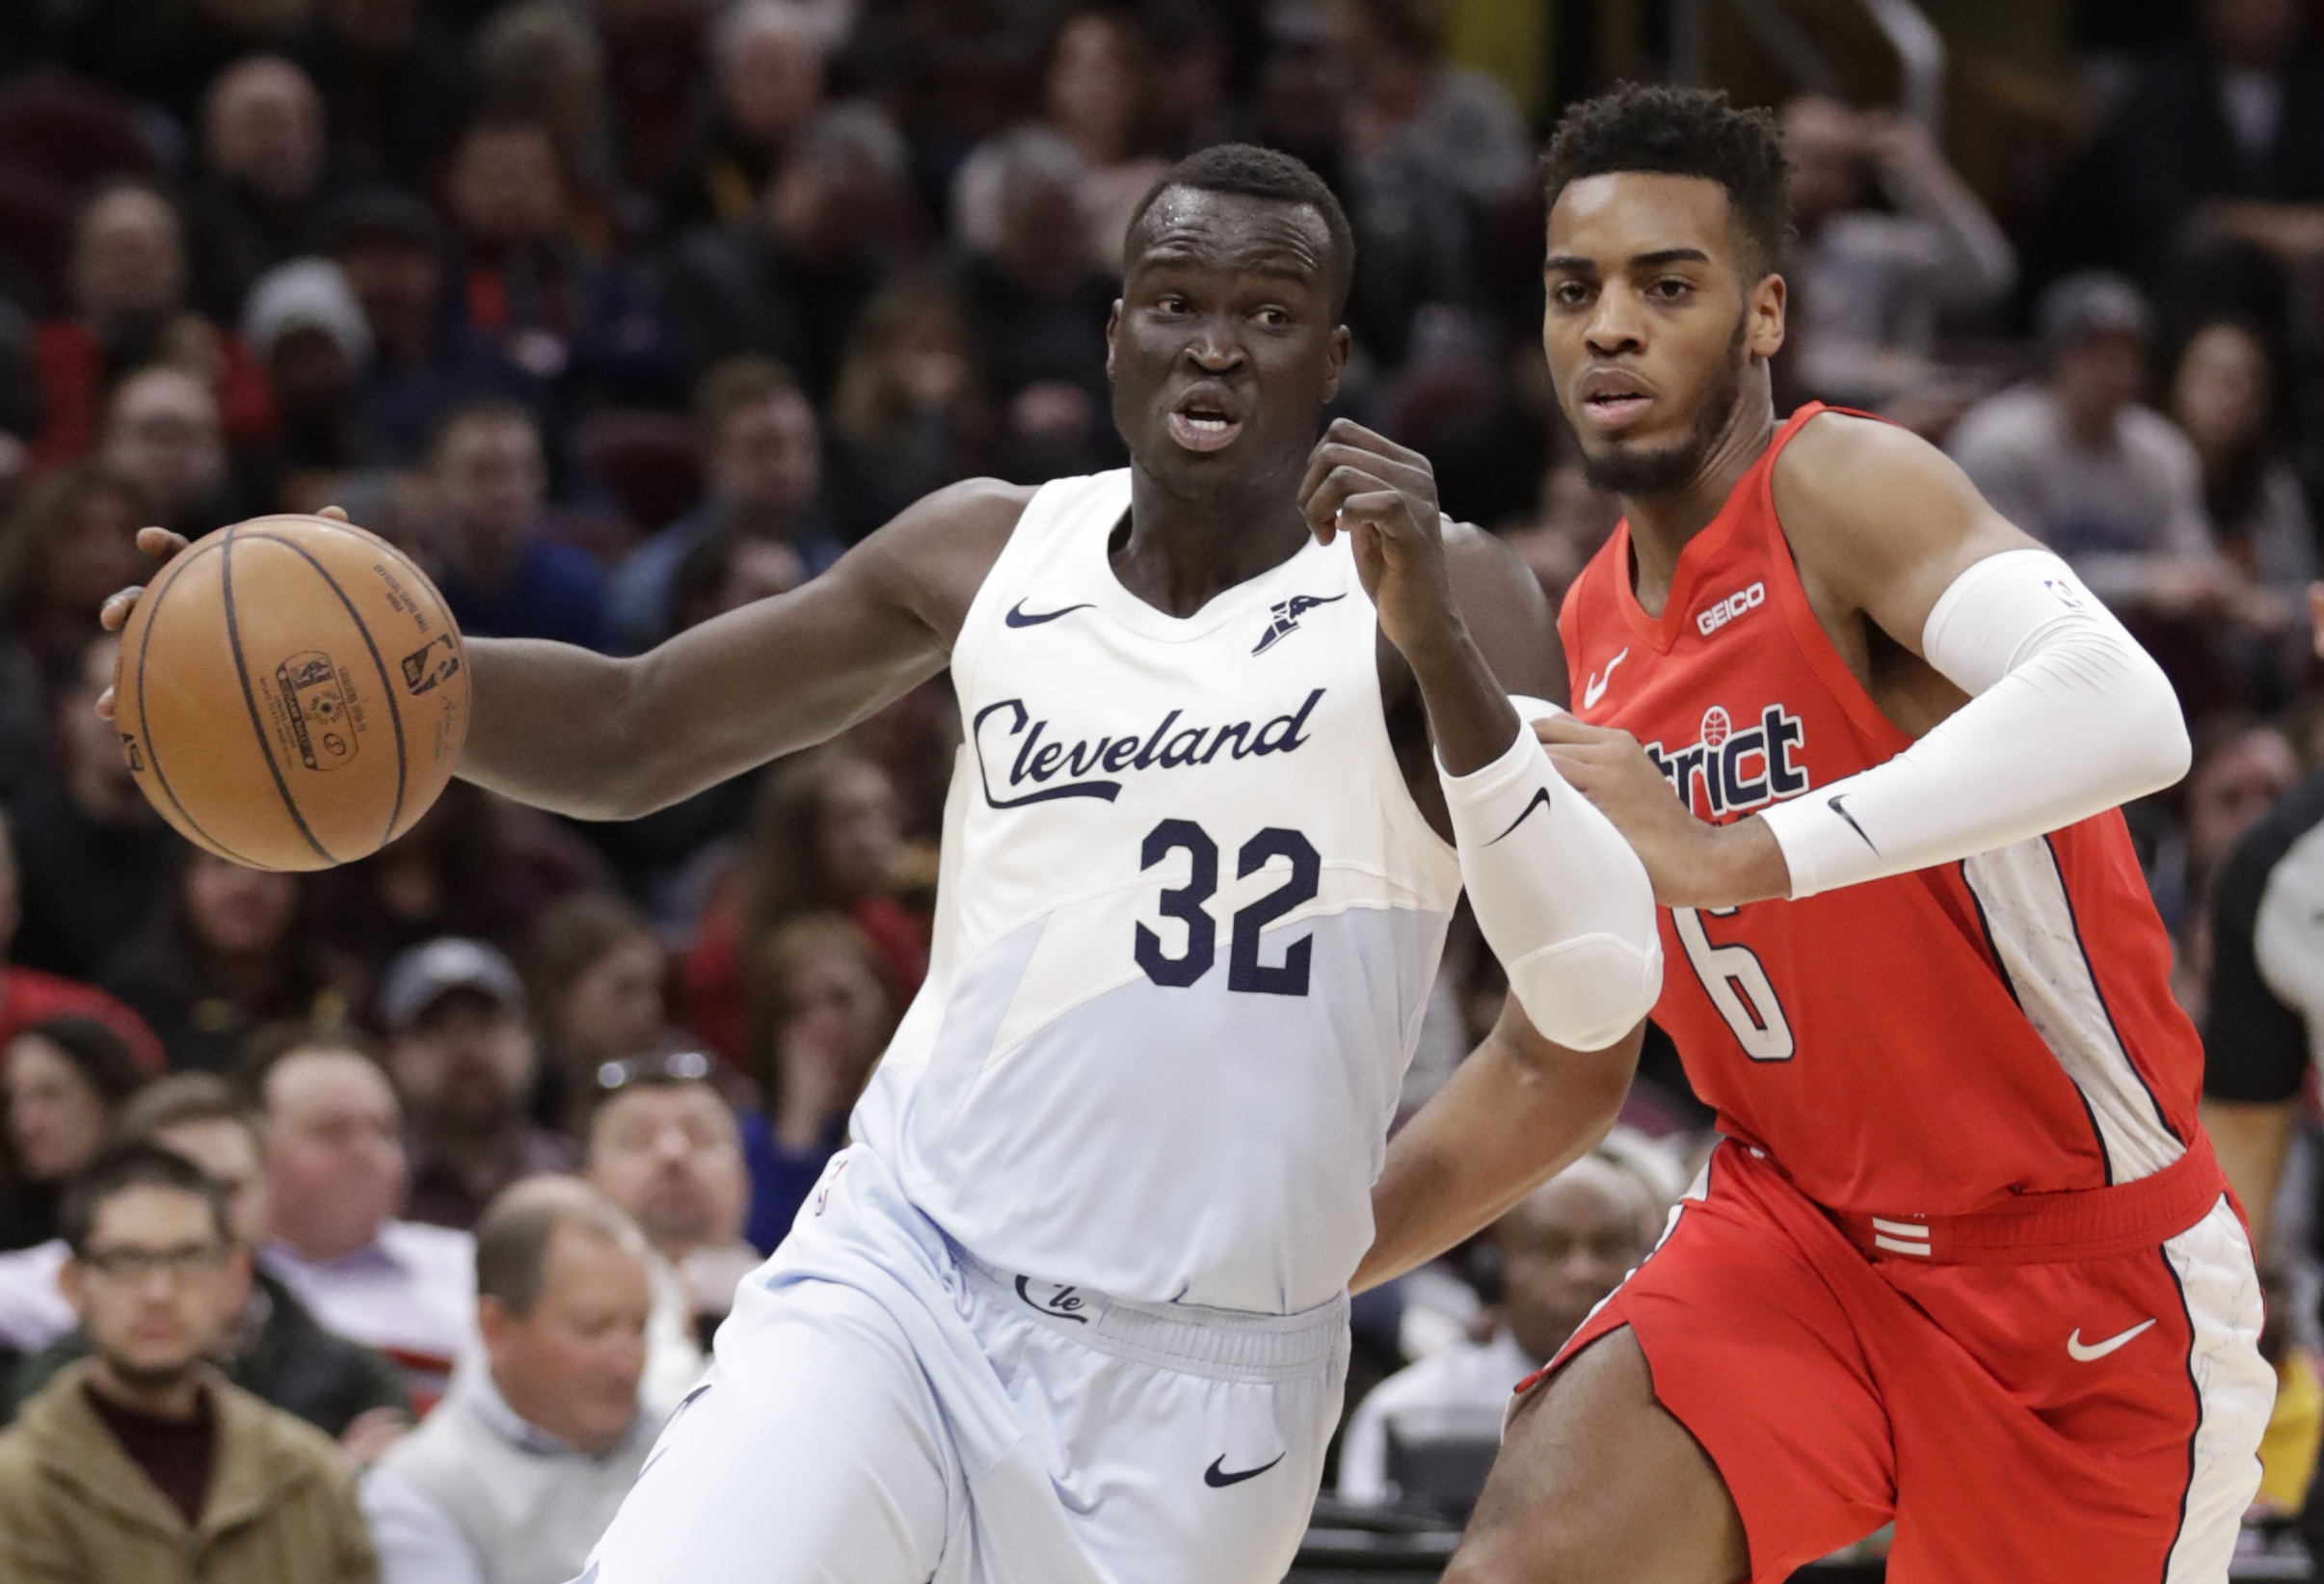 Former Cleveland forward Deng Adel will be part of the Brooklyn Nets’ much-anticipated training camp ahead of the 2019-20 season after signing with the team Tuesday. (AP Photo/Tony Dejak)